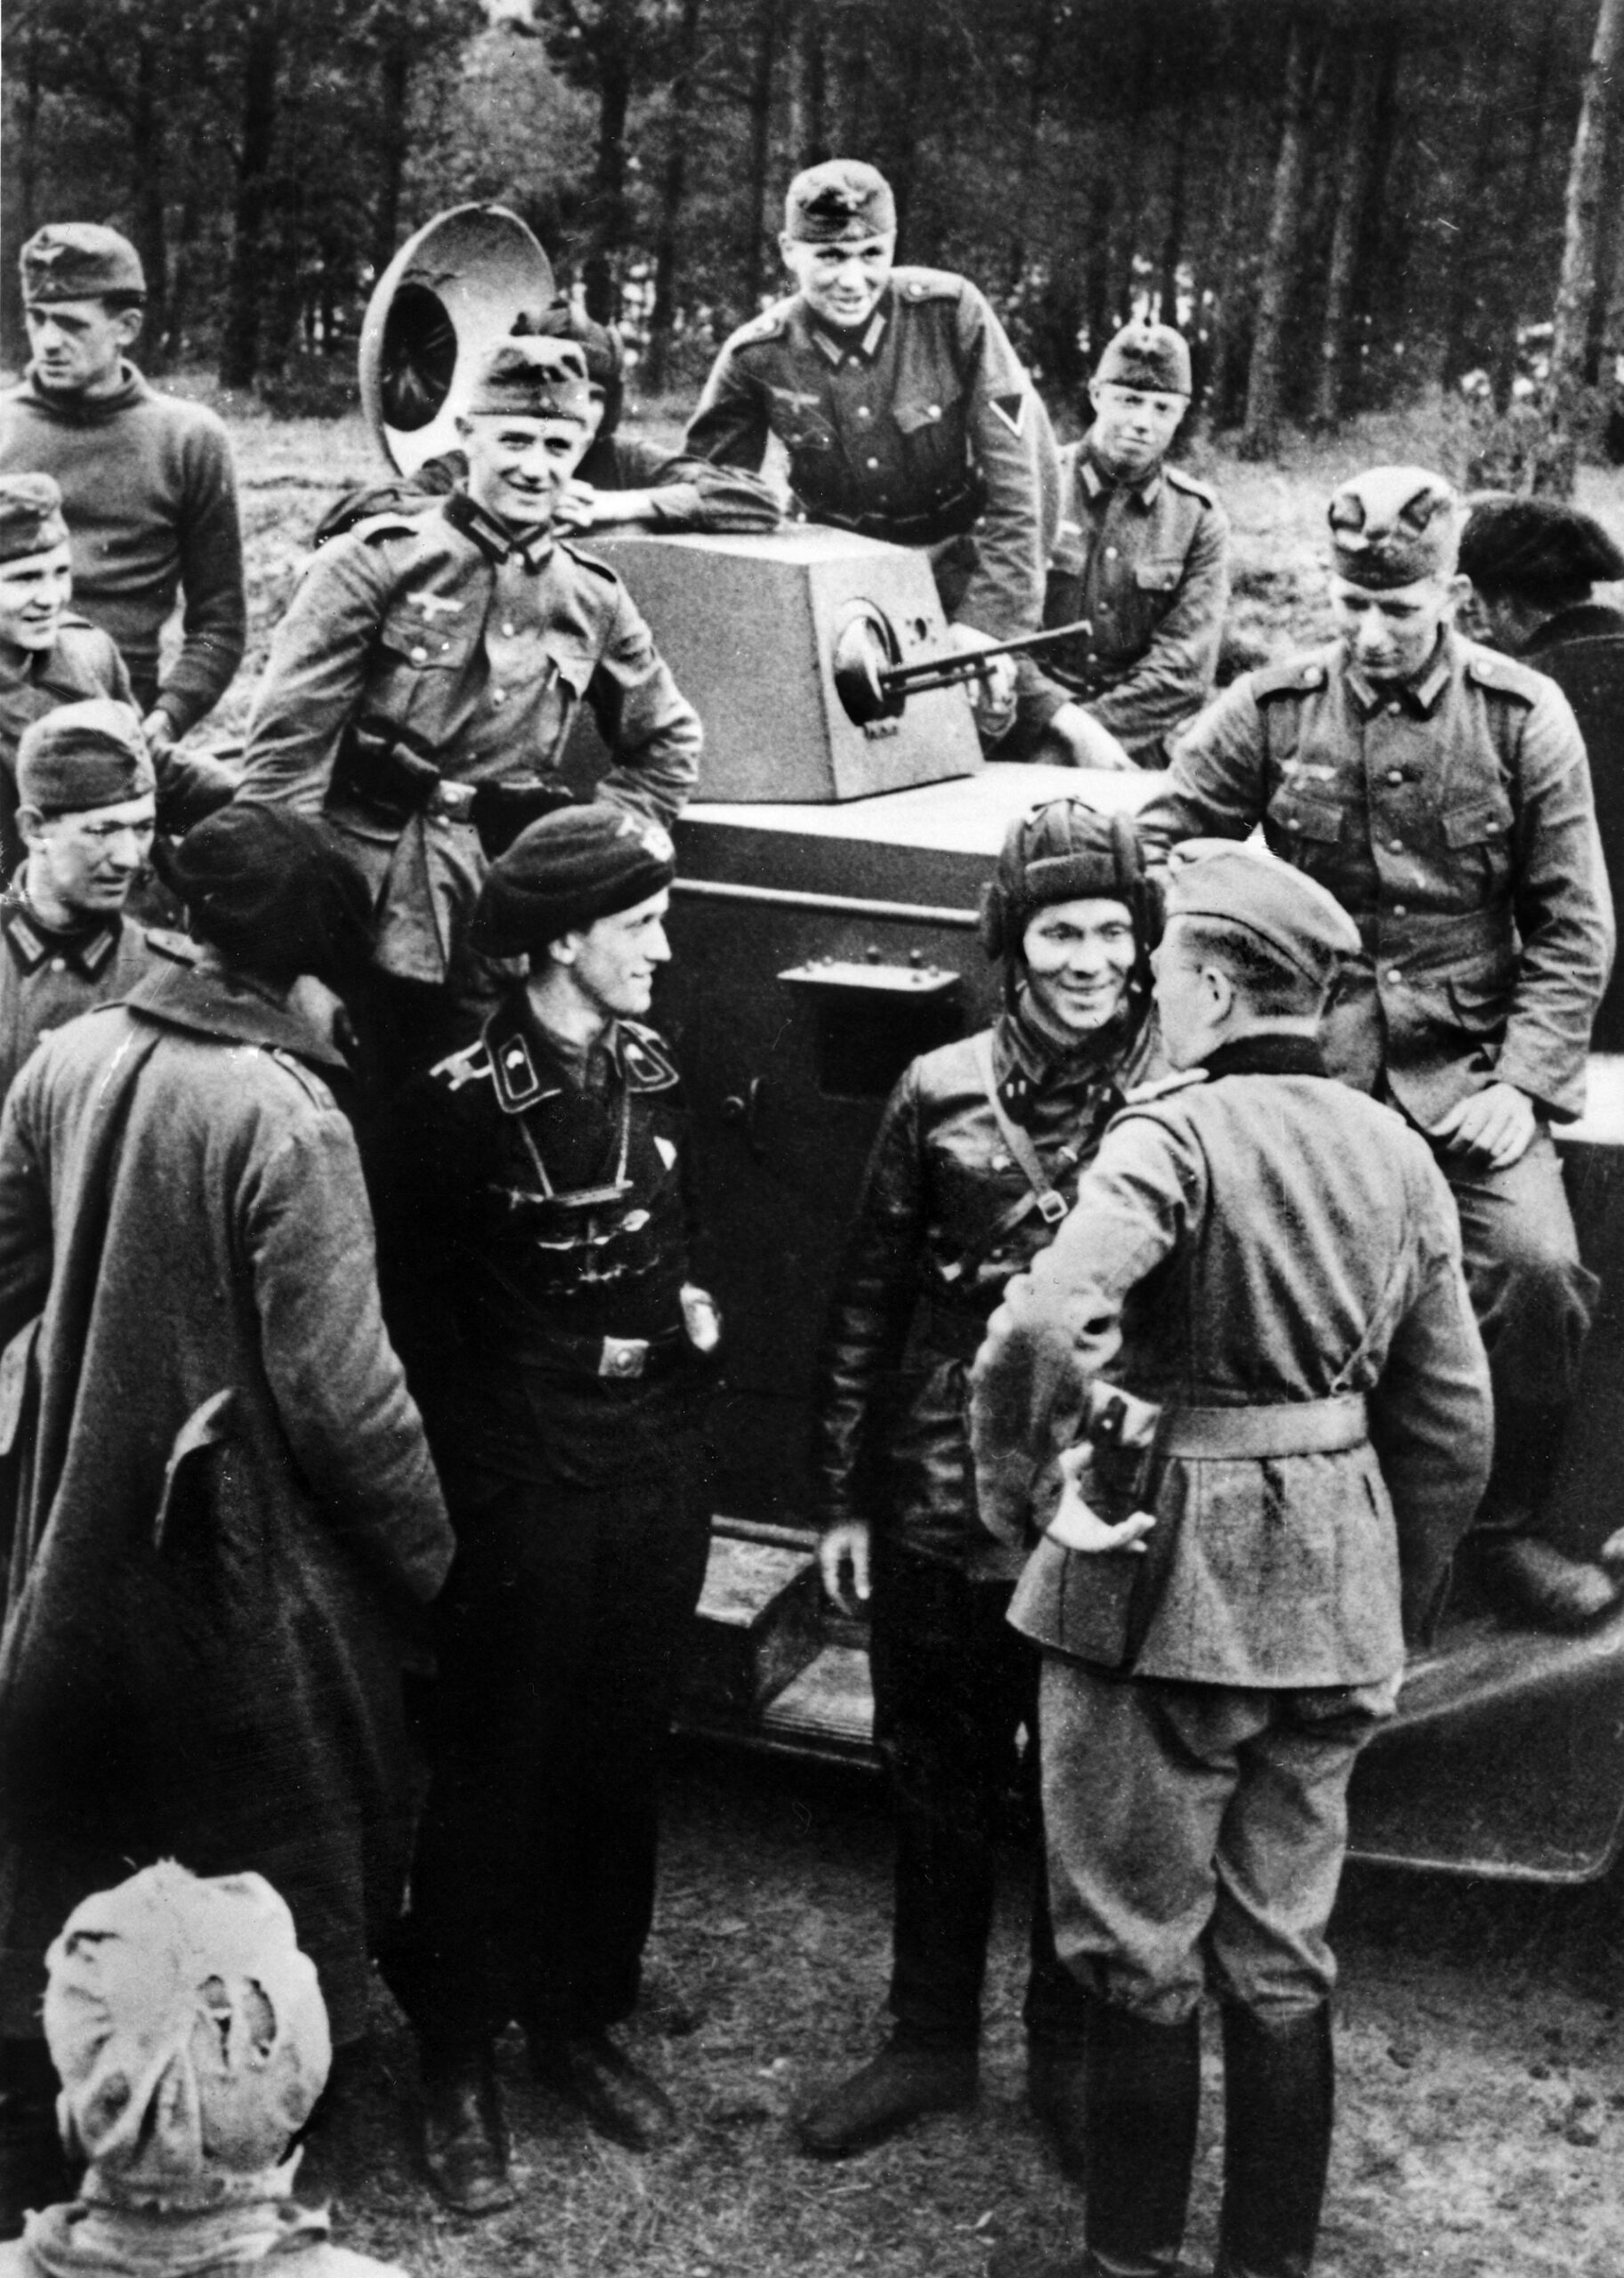 Red Army meets Wehrmacht in this photo as invading German and Soviet soldiers gather around a Soviet tank somewhere in Poland. The Nazis and Soviets concluded a non-aggression pact in 1939 and agreed in a secret protocol to invade Poland from west and then east, dismembering the country.